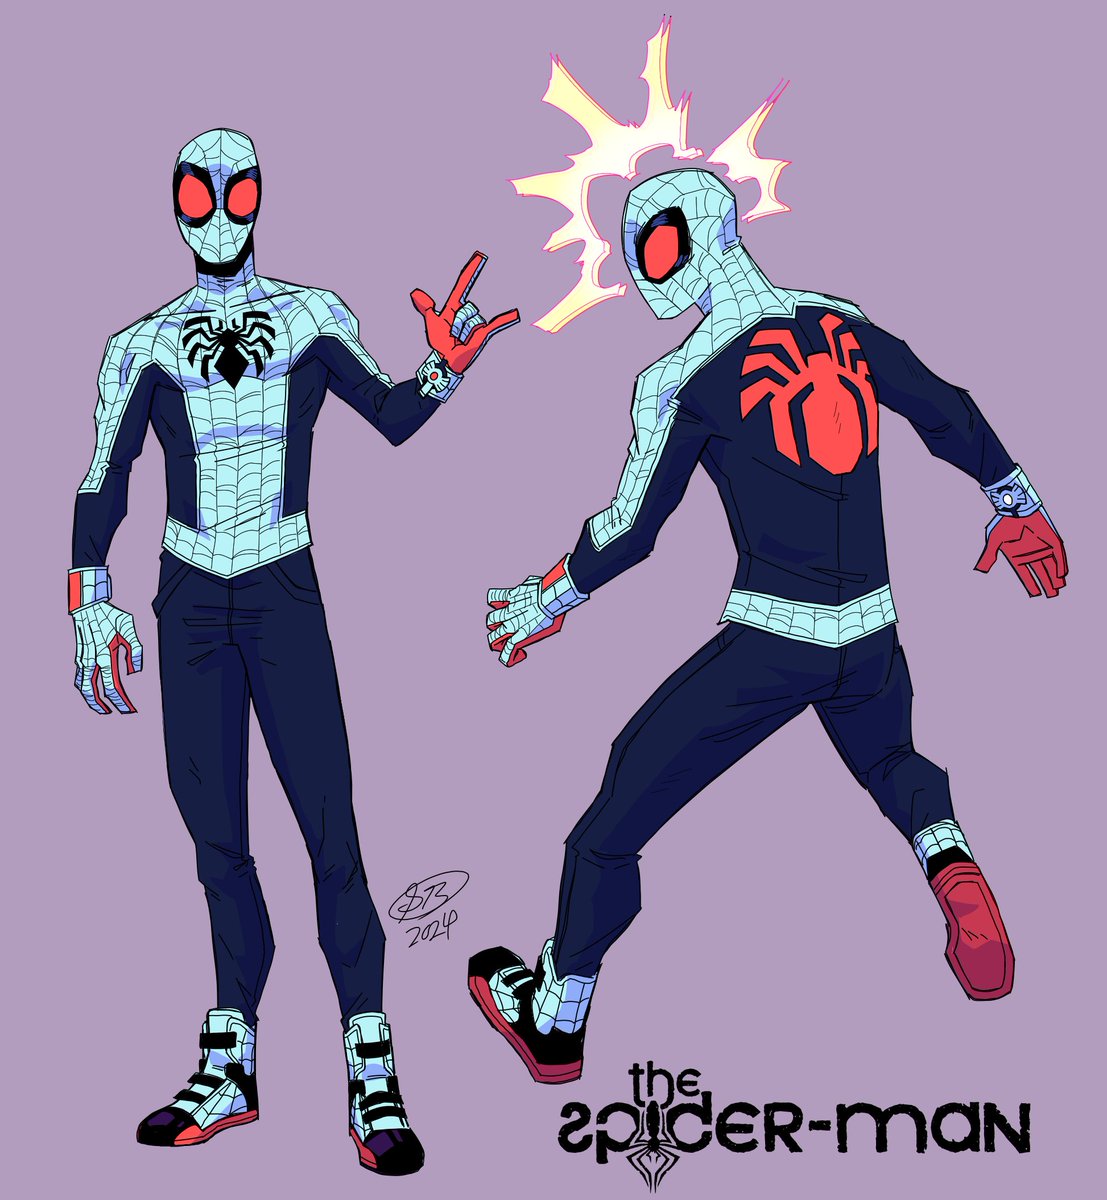 Peter Parker: The Spider-Man Hopefully this is the last time I update this design lol I took all the aspects I liked from older incarnations and pooled them into this one Also some fun color alts cuz I do that with every design now